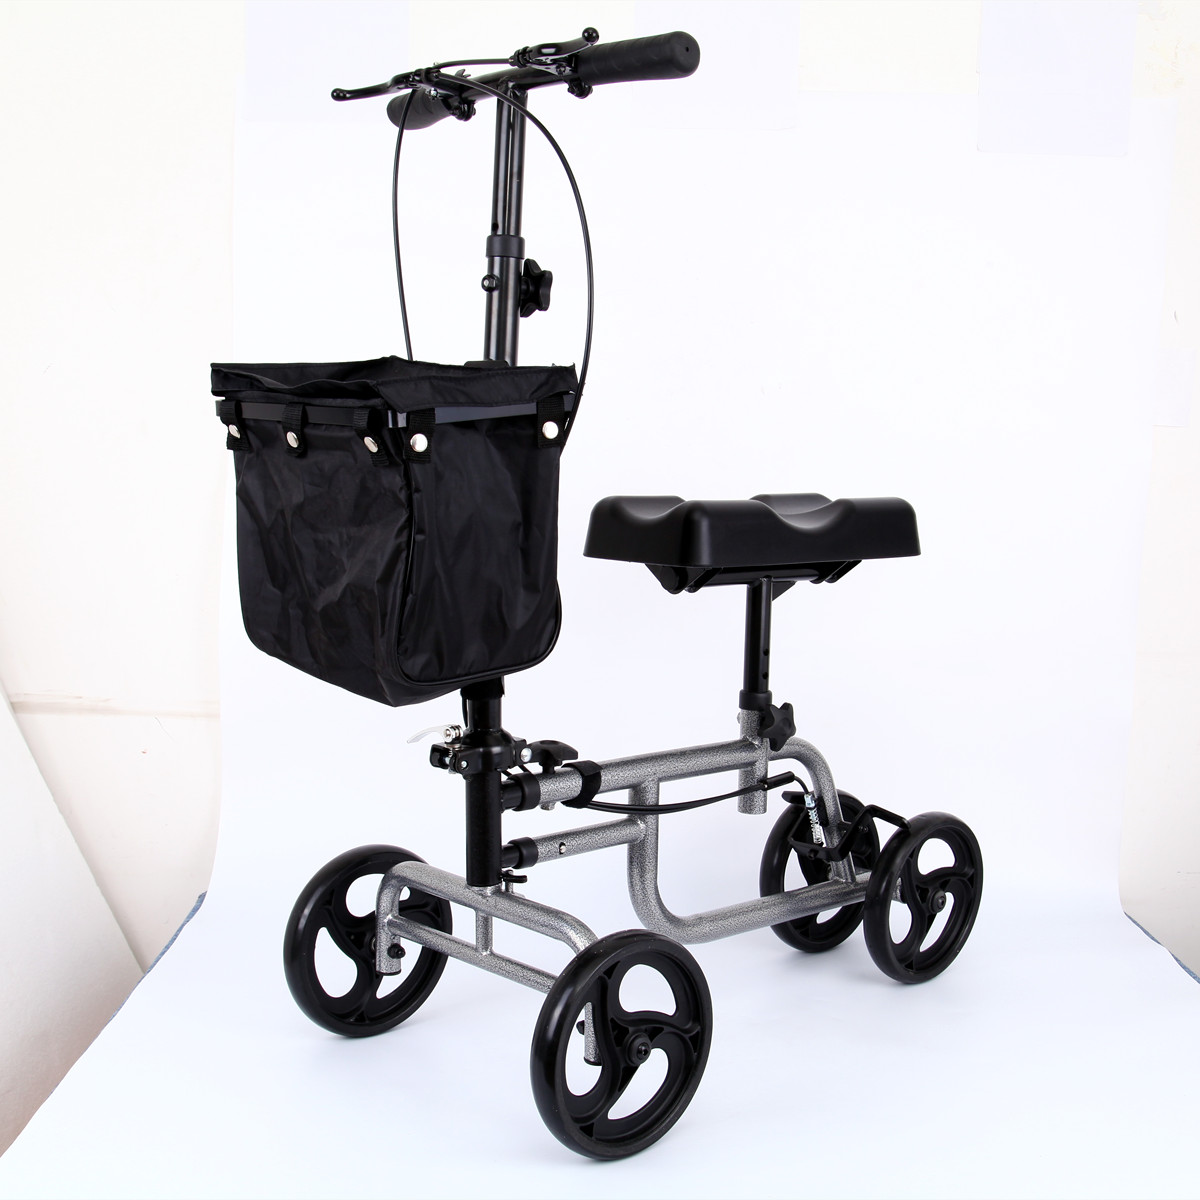 Knee-Walker-Scooter-Foldable-Adjusted-Height-Walking-Aid-Knee-Support-and-Basket-1940439-6